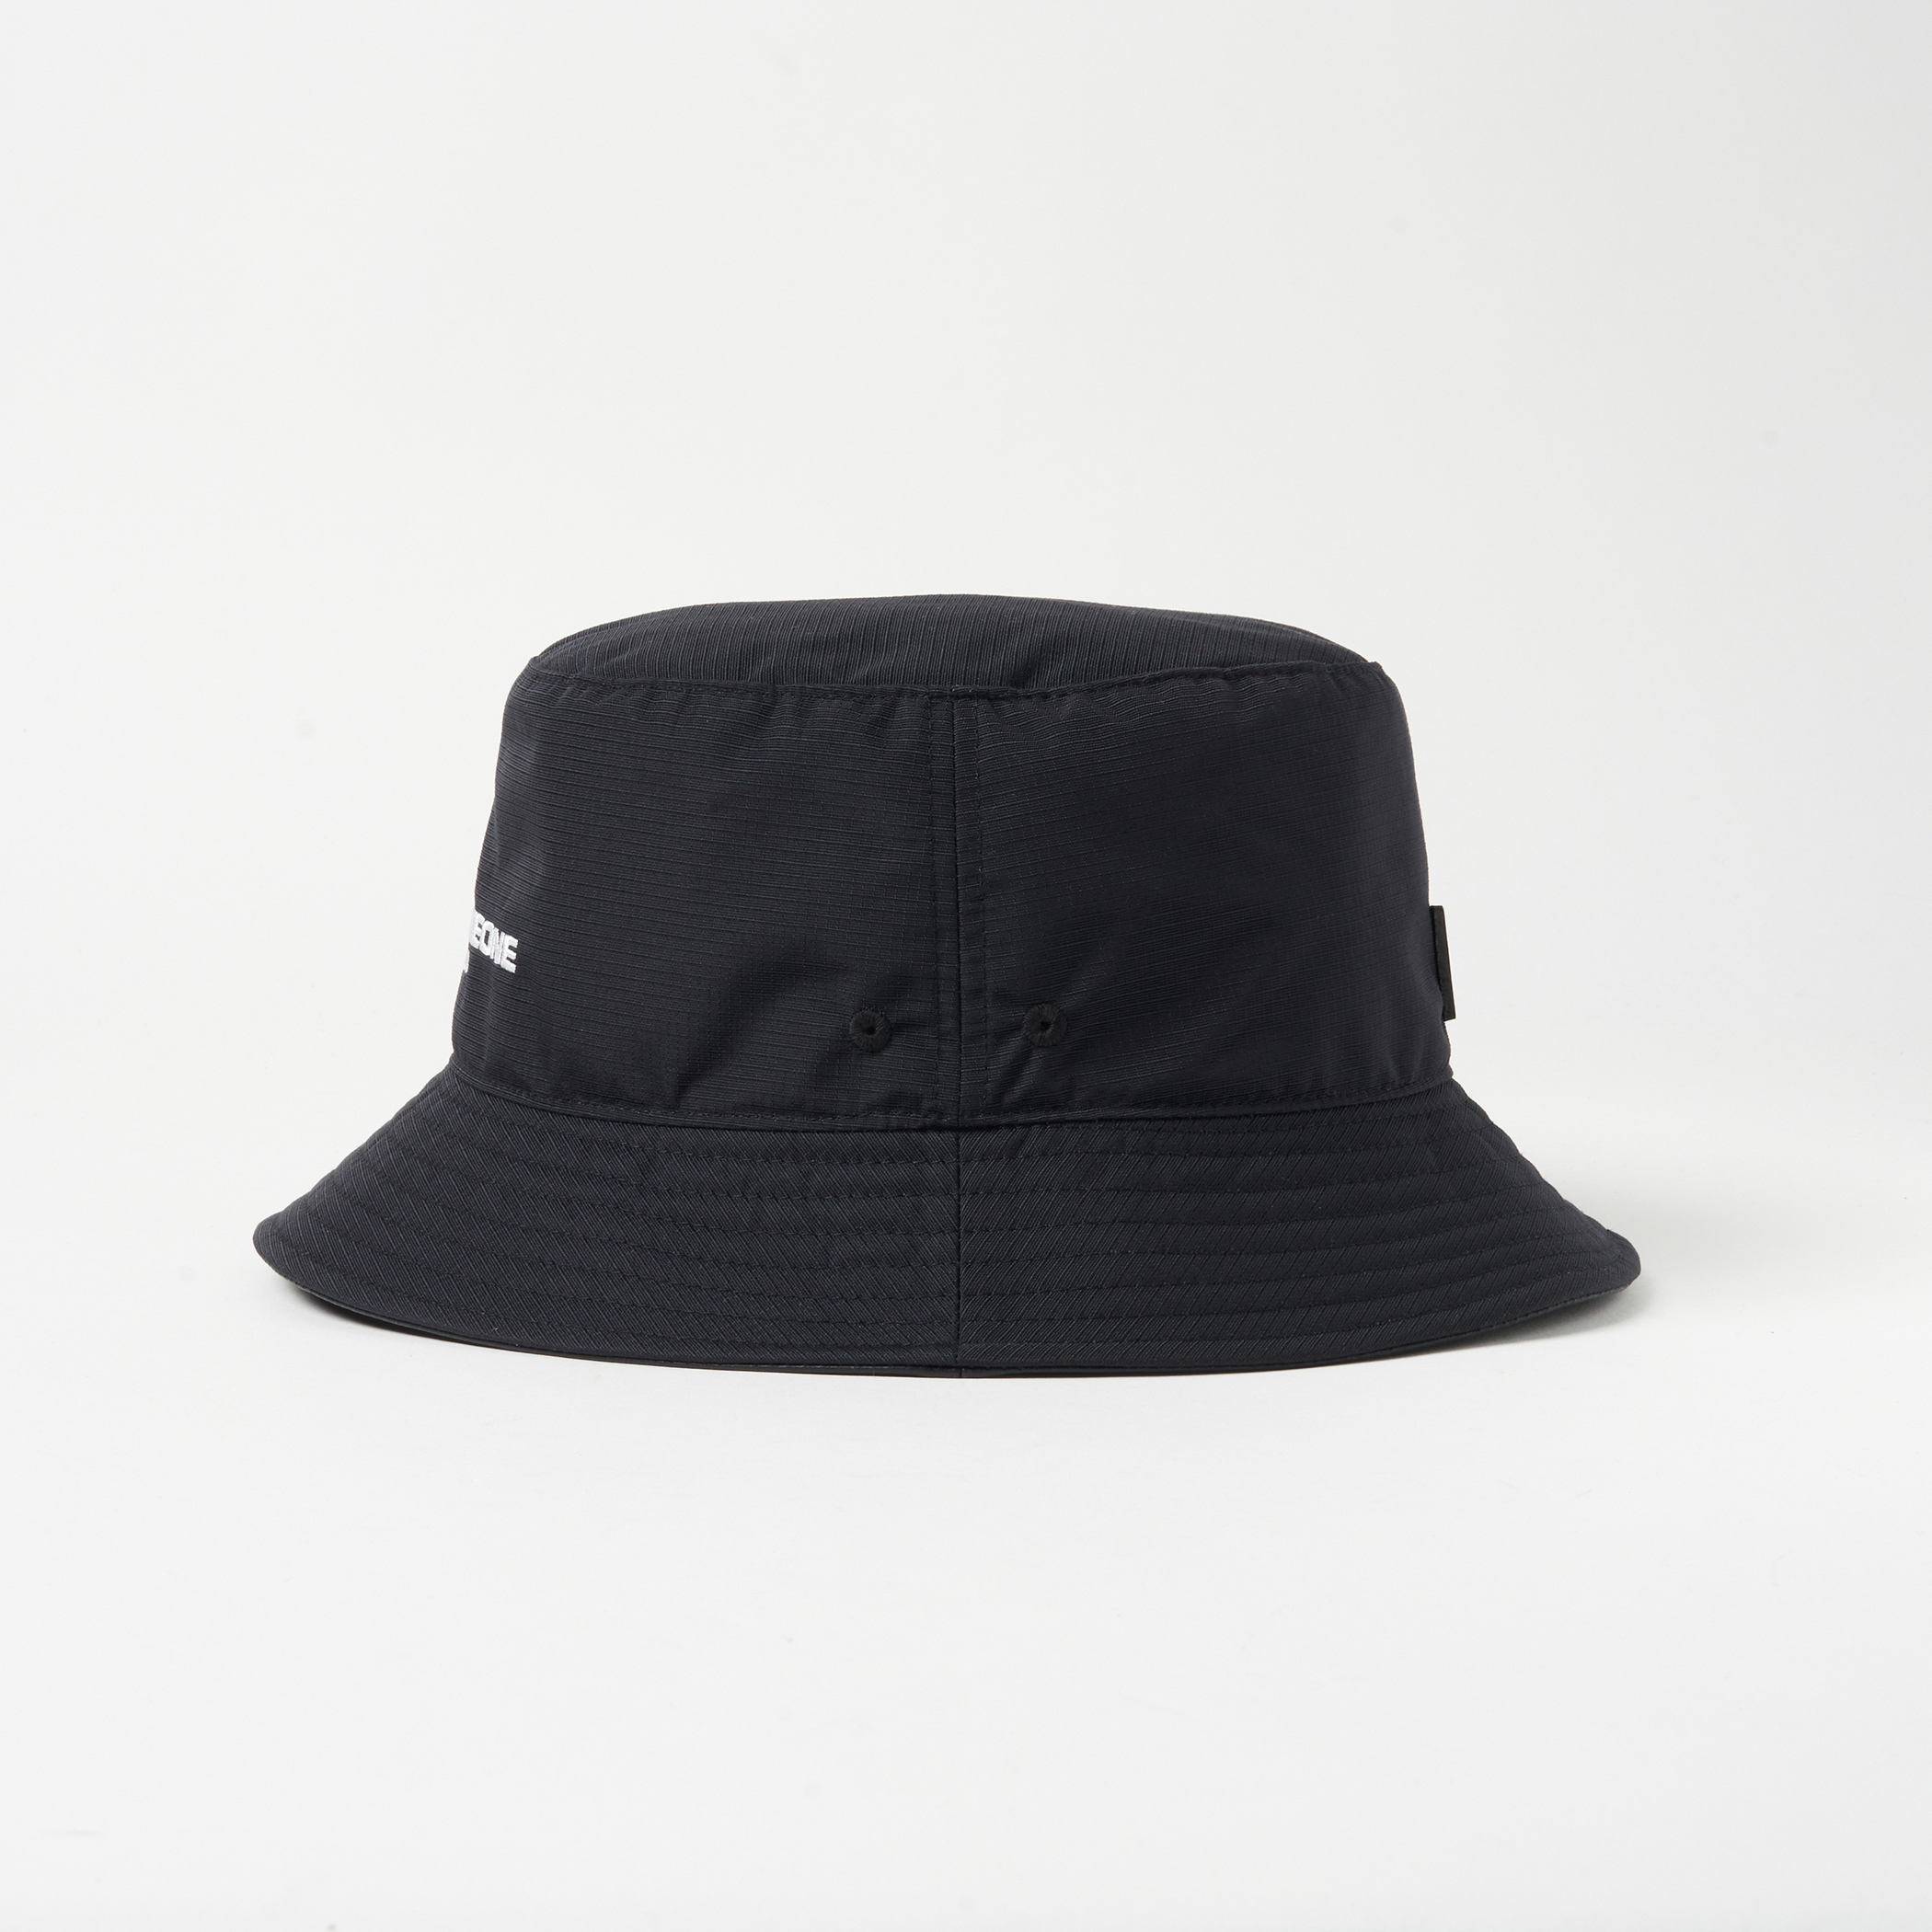 MOUNT HAT FSO 001 バケハ 川村壱馬着用 - ハット